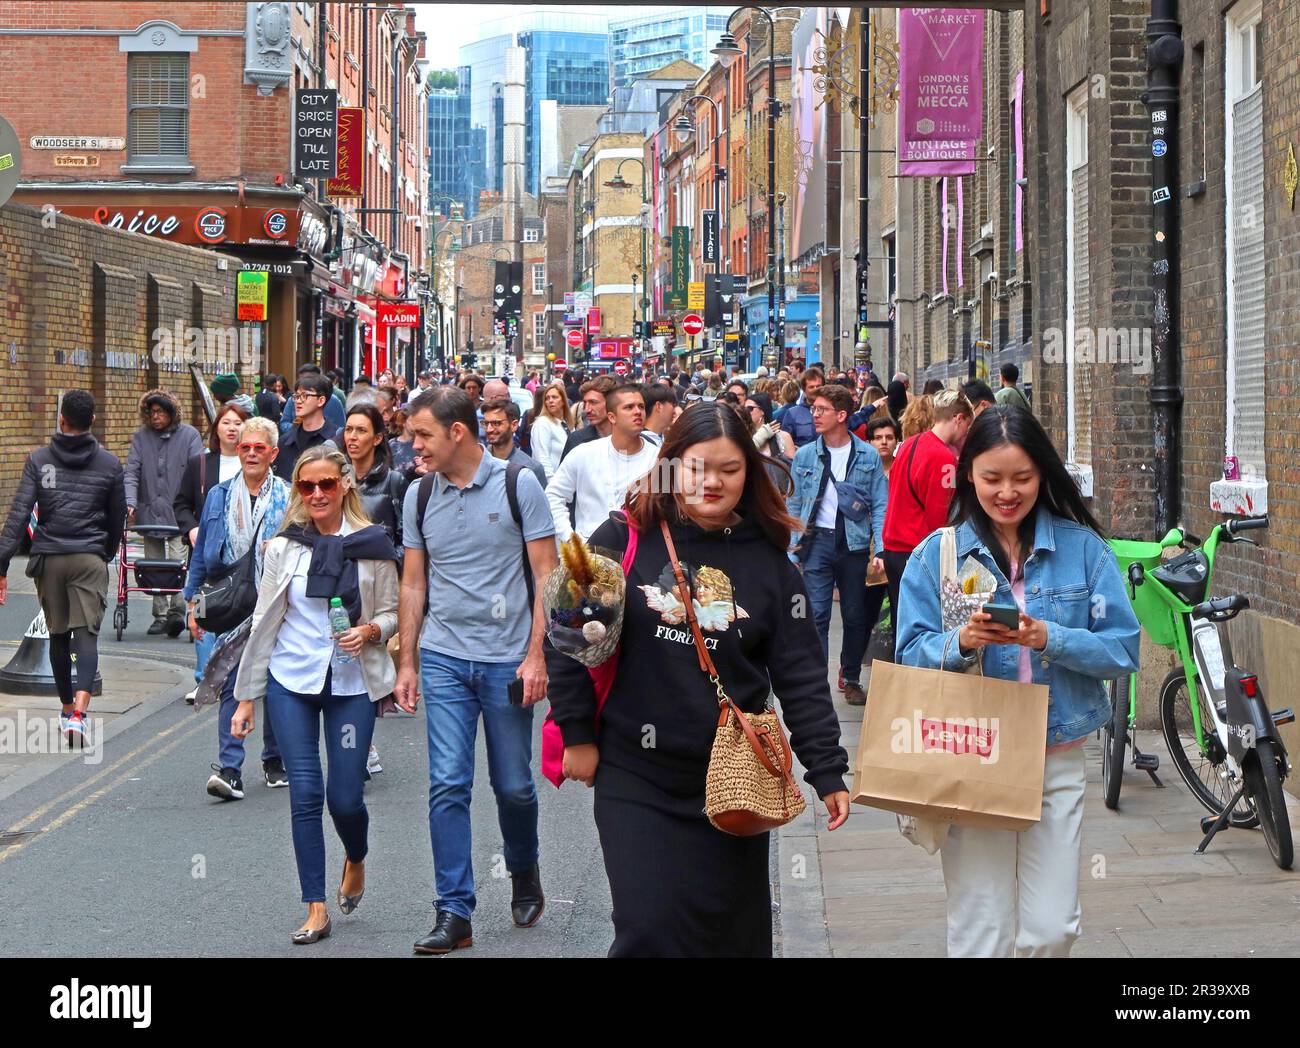 Crowded street with tourists on a busy Brick Lane, London, GB, E1 6QL, looking east towards mosque and Aldgate East Stock Photo